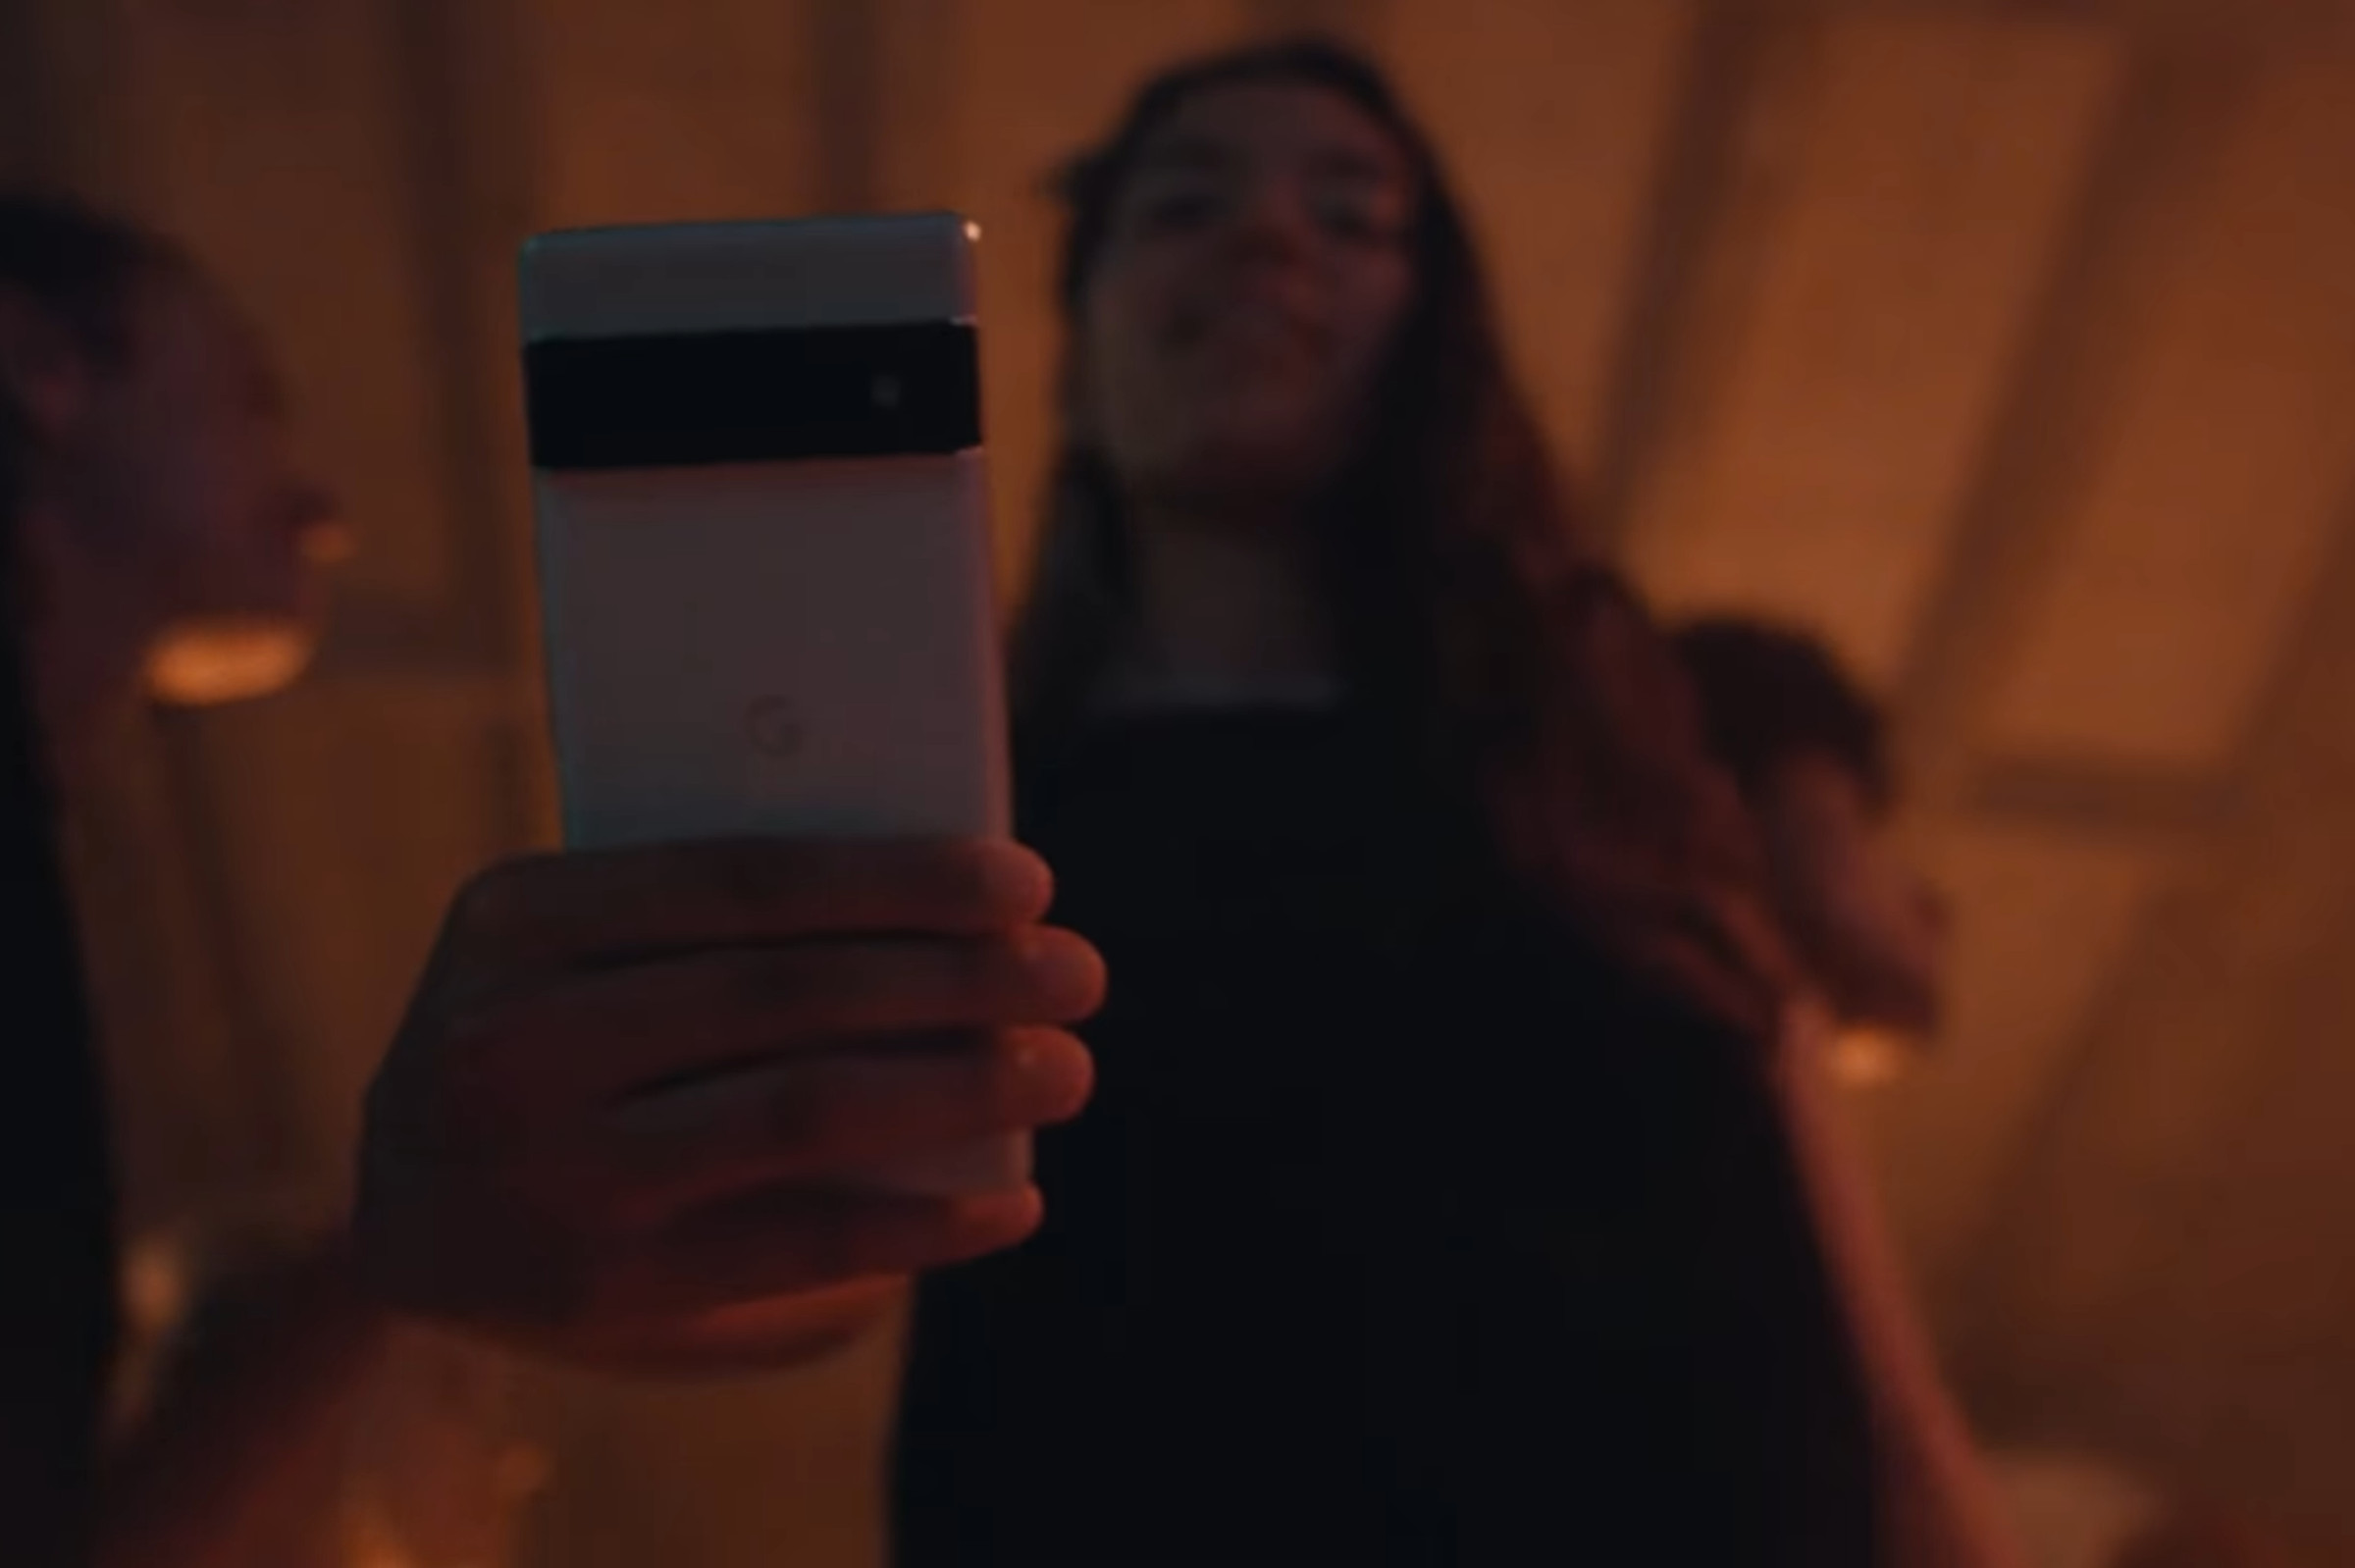 A still from the teaser showing the rear of the phone.